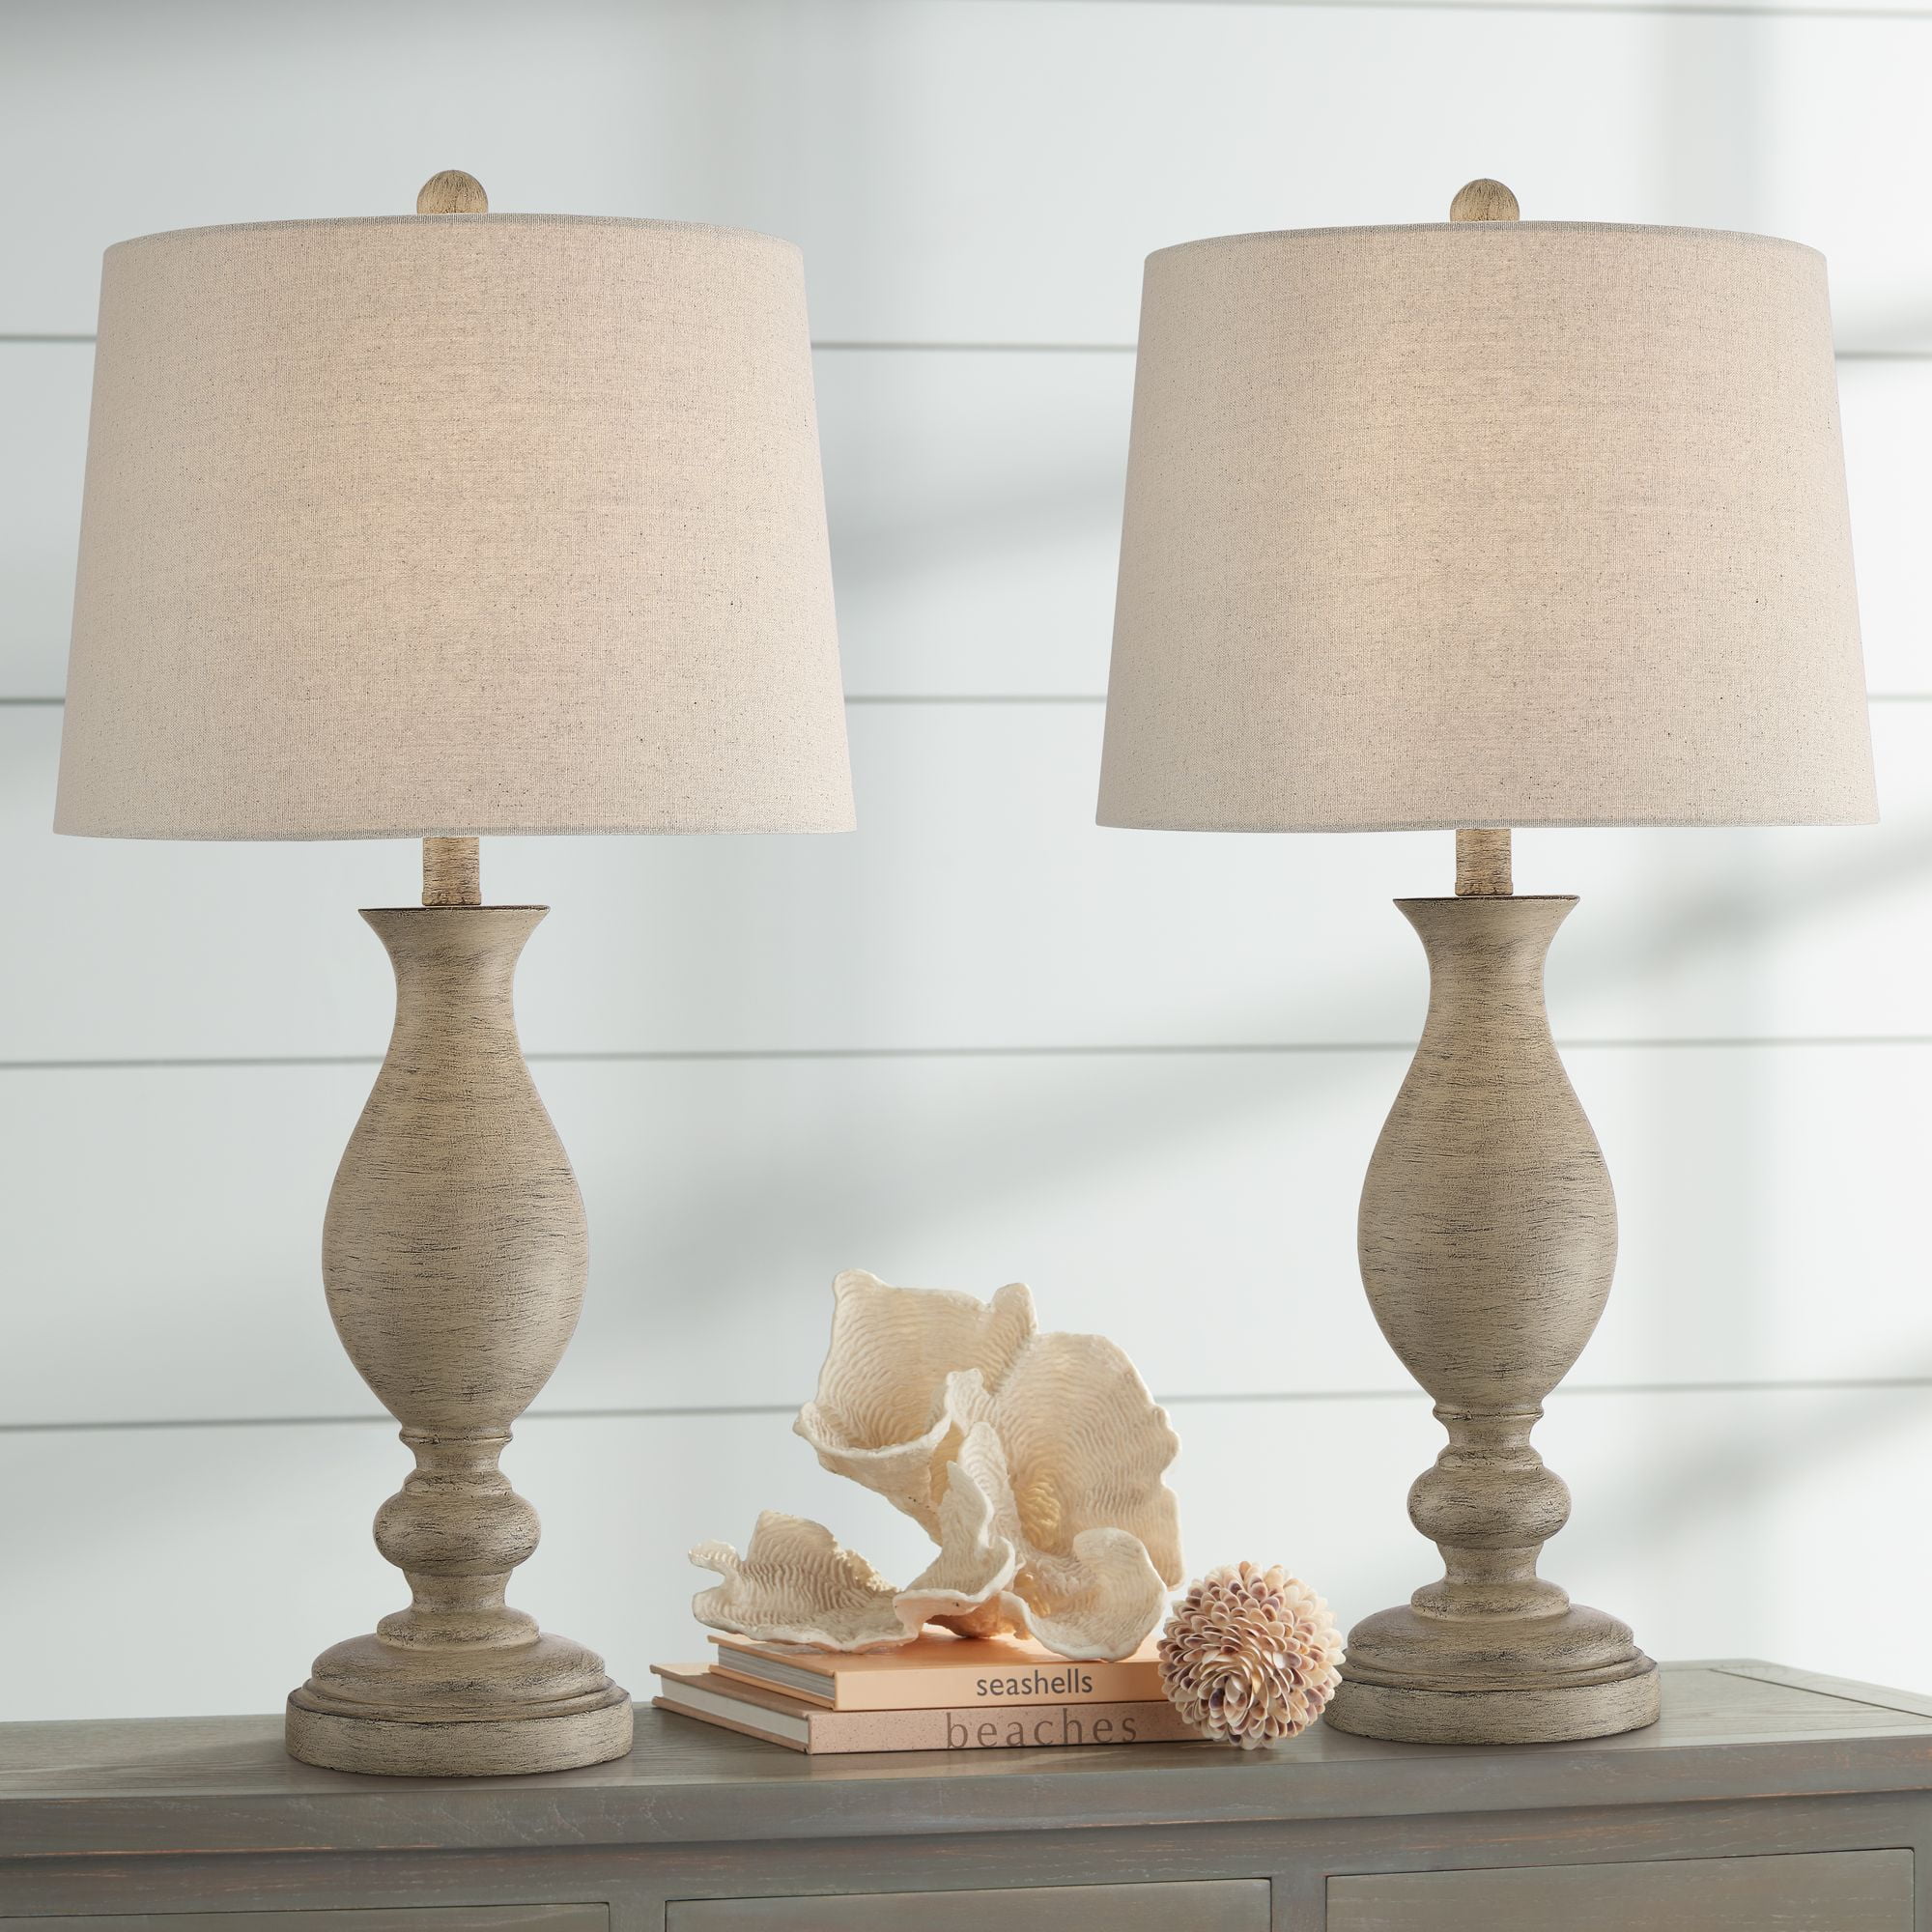 Regency Hill Country Cottage Table Lamps Set of 2 Cream Wood Oatmeal